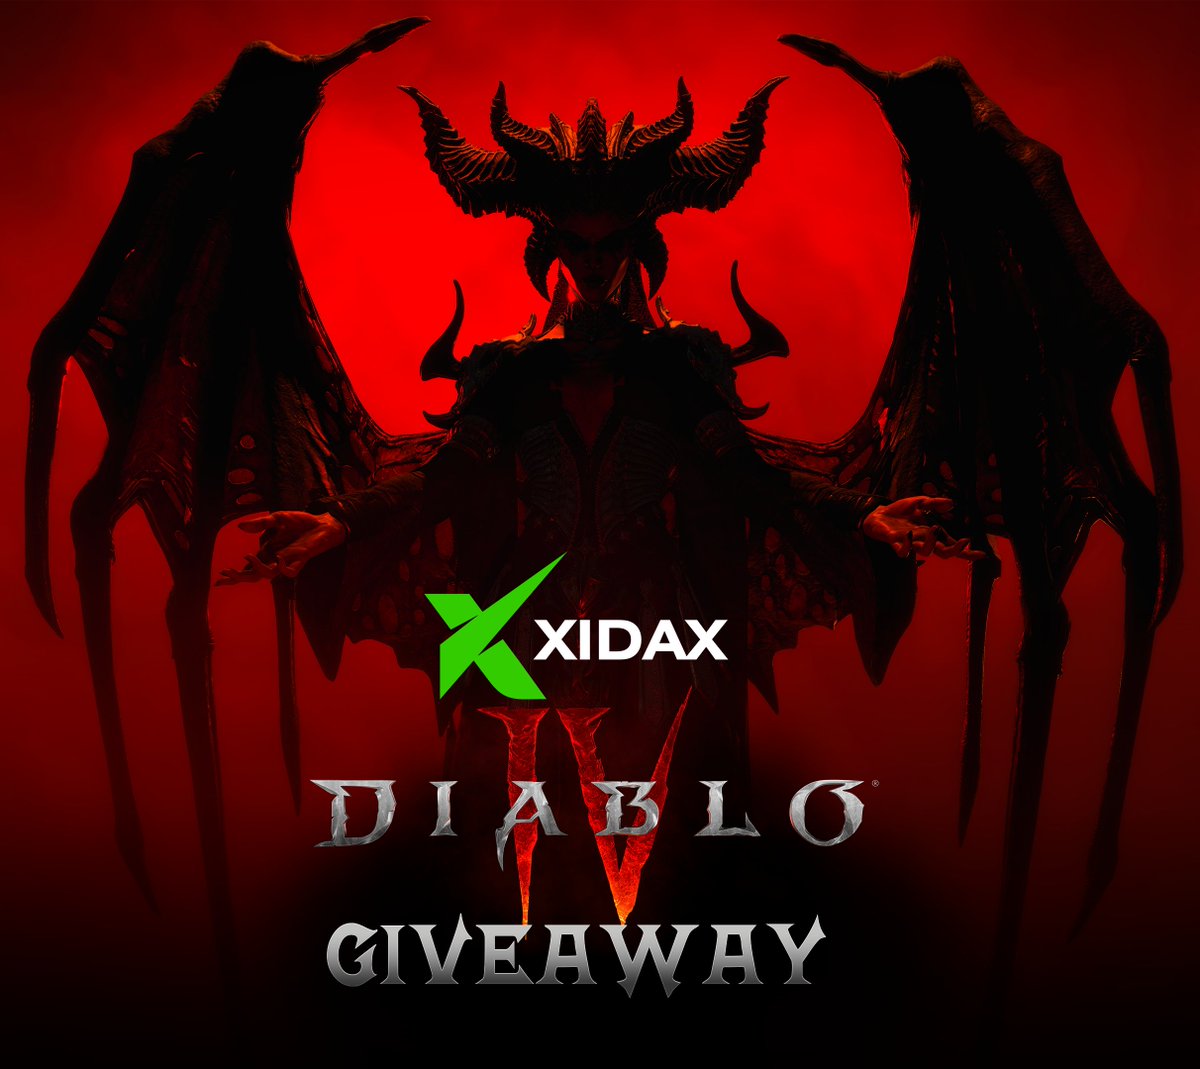 There is no light here, you came to the darkness for knowledge! Xidax is giving away a copy of Diablo IV! All you have to do is - Like the post - Comment your starting class in the comments - Retweet this post! We will announce the winner on Wednesday, June 7th!